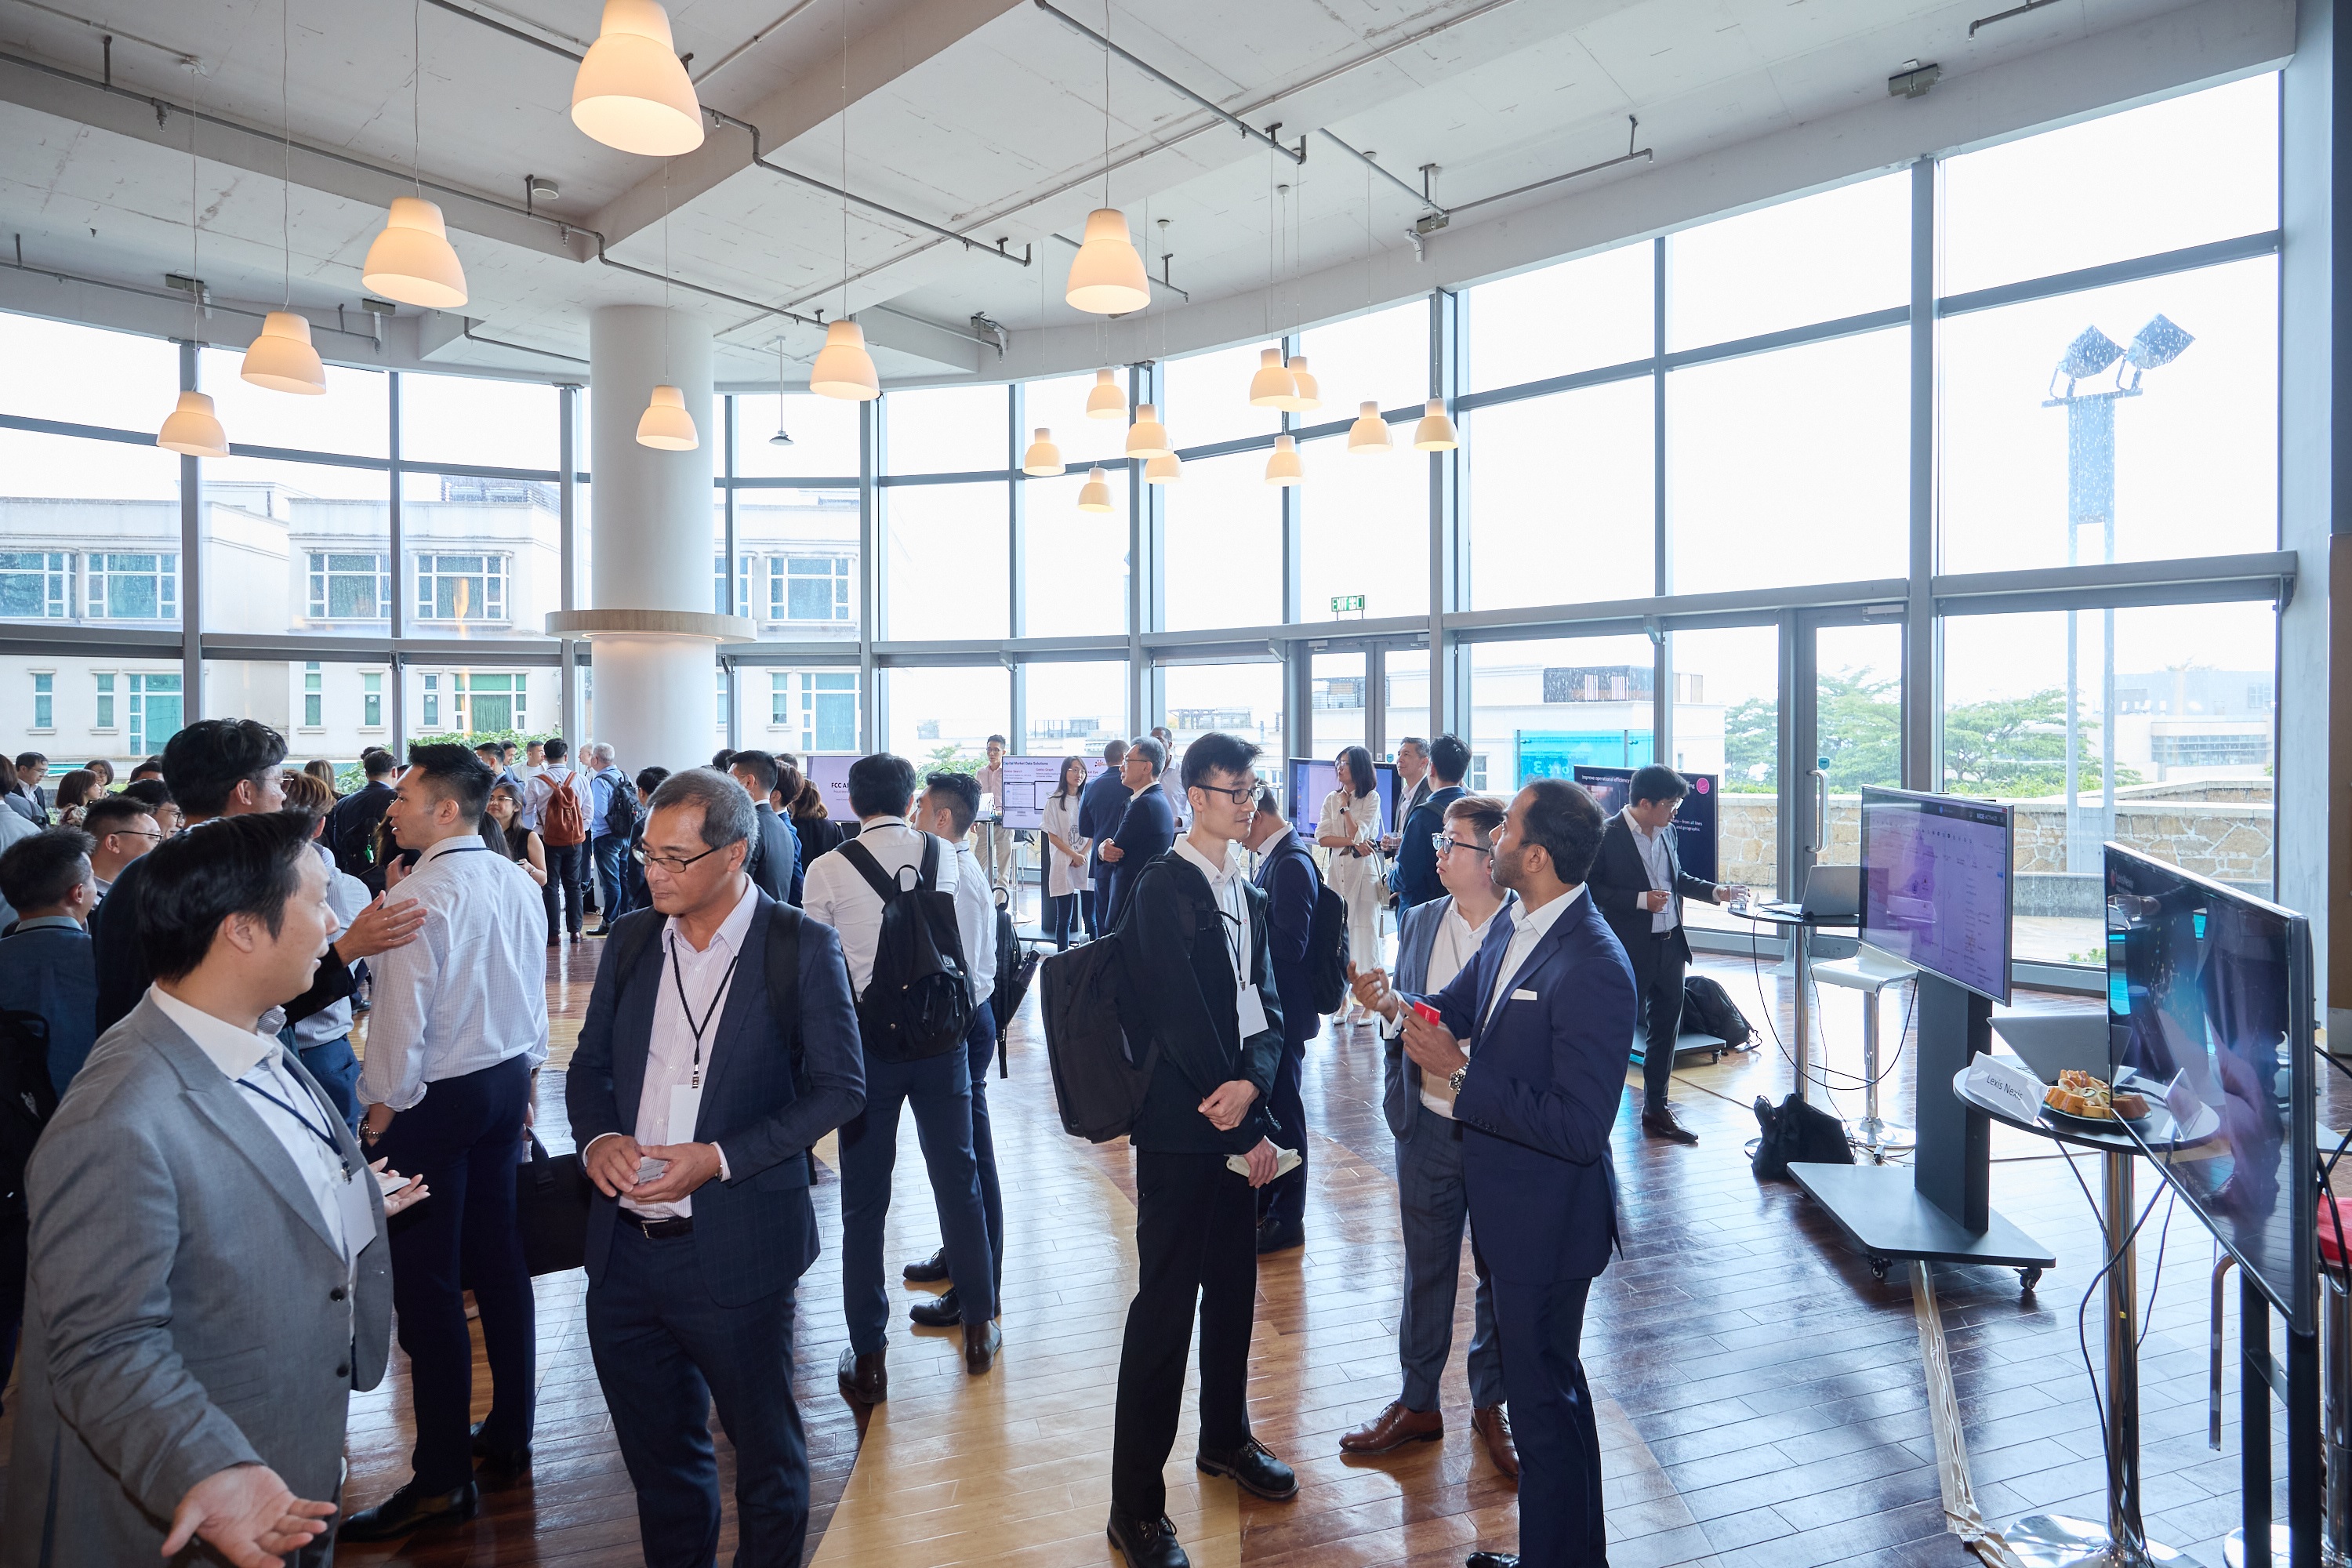 Technology companies including Cyberport start-ups demonstrate relevant Regtech tools and solutions to participating banks and SVF licensees at Regtech Connect.